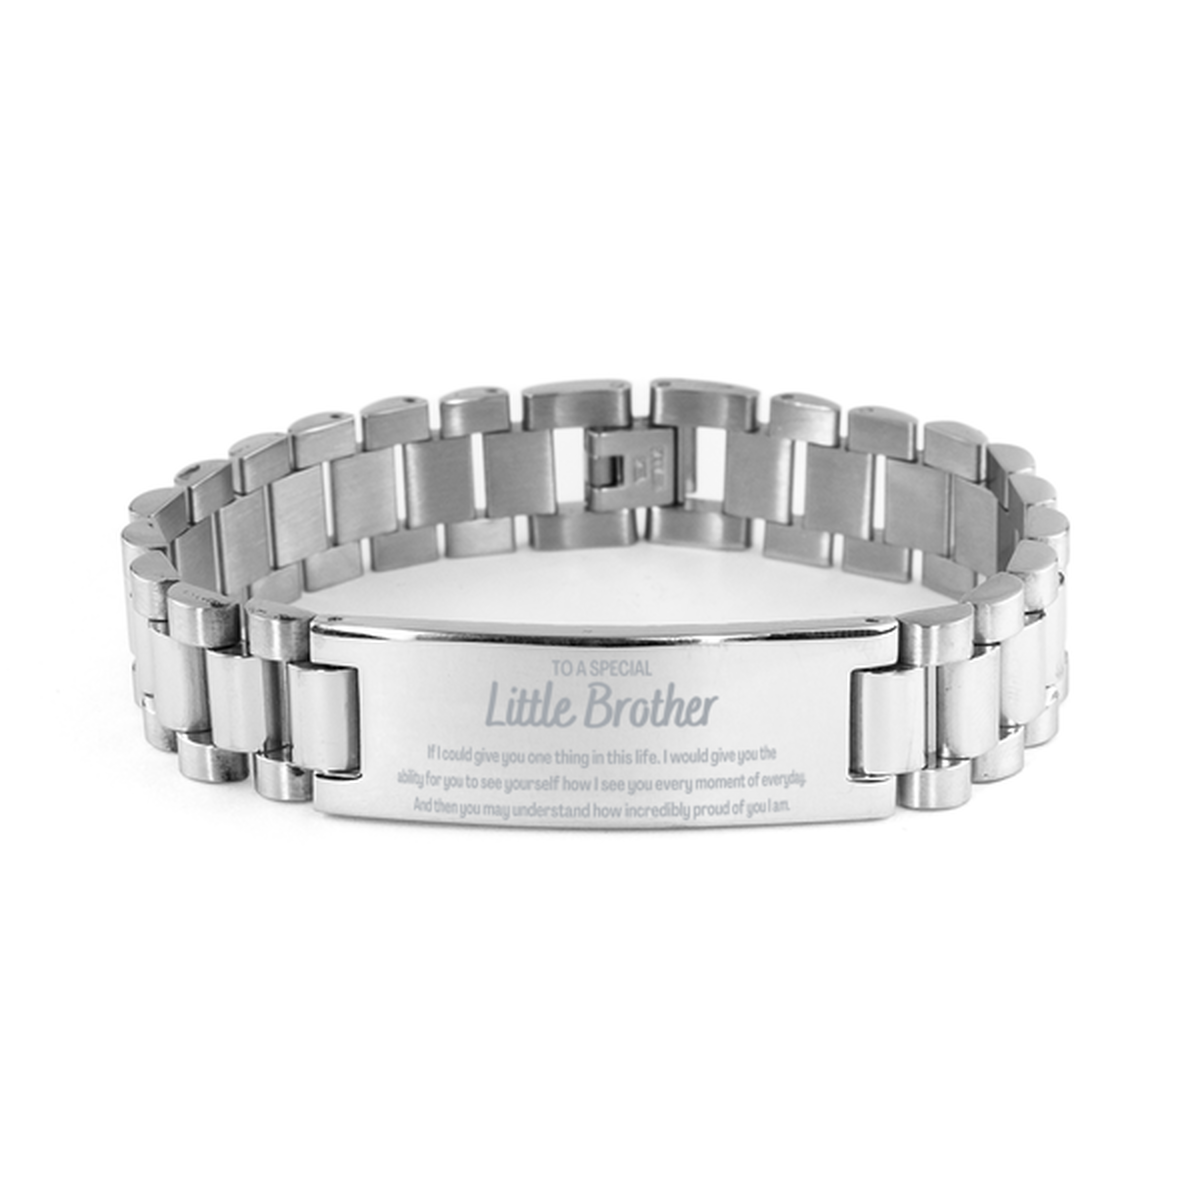 To My Little Brother Ladder Stainless Steel Bracelet, Gifts For Little Brother Engraved, Inspirational Gifts for Christmas Birthday, Epic Gifts for Little Brother To A Special Little Brother how incredibly proud of you I am